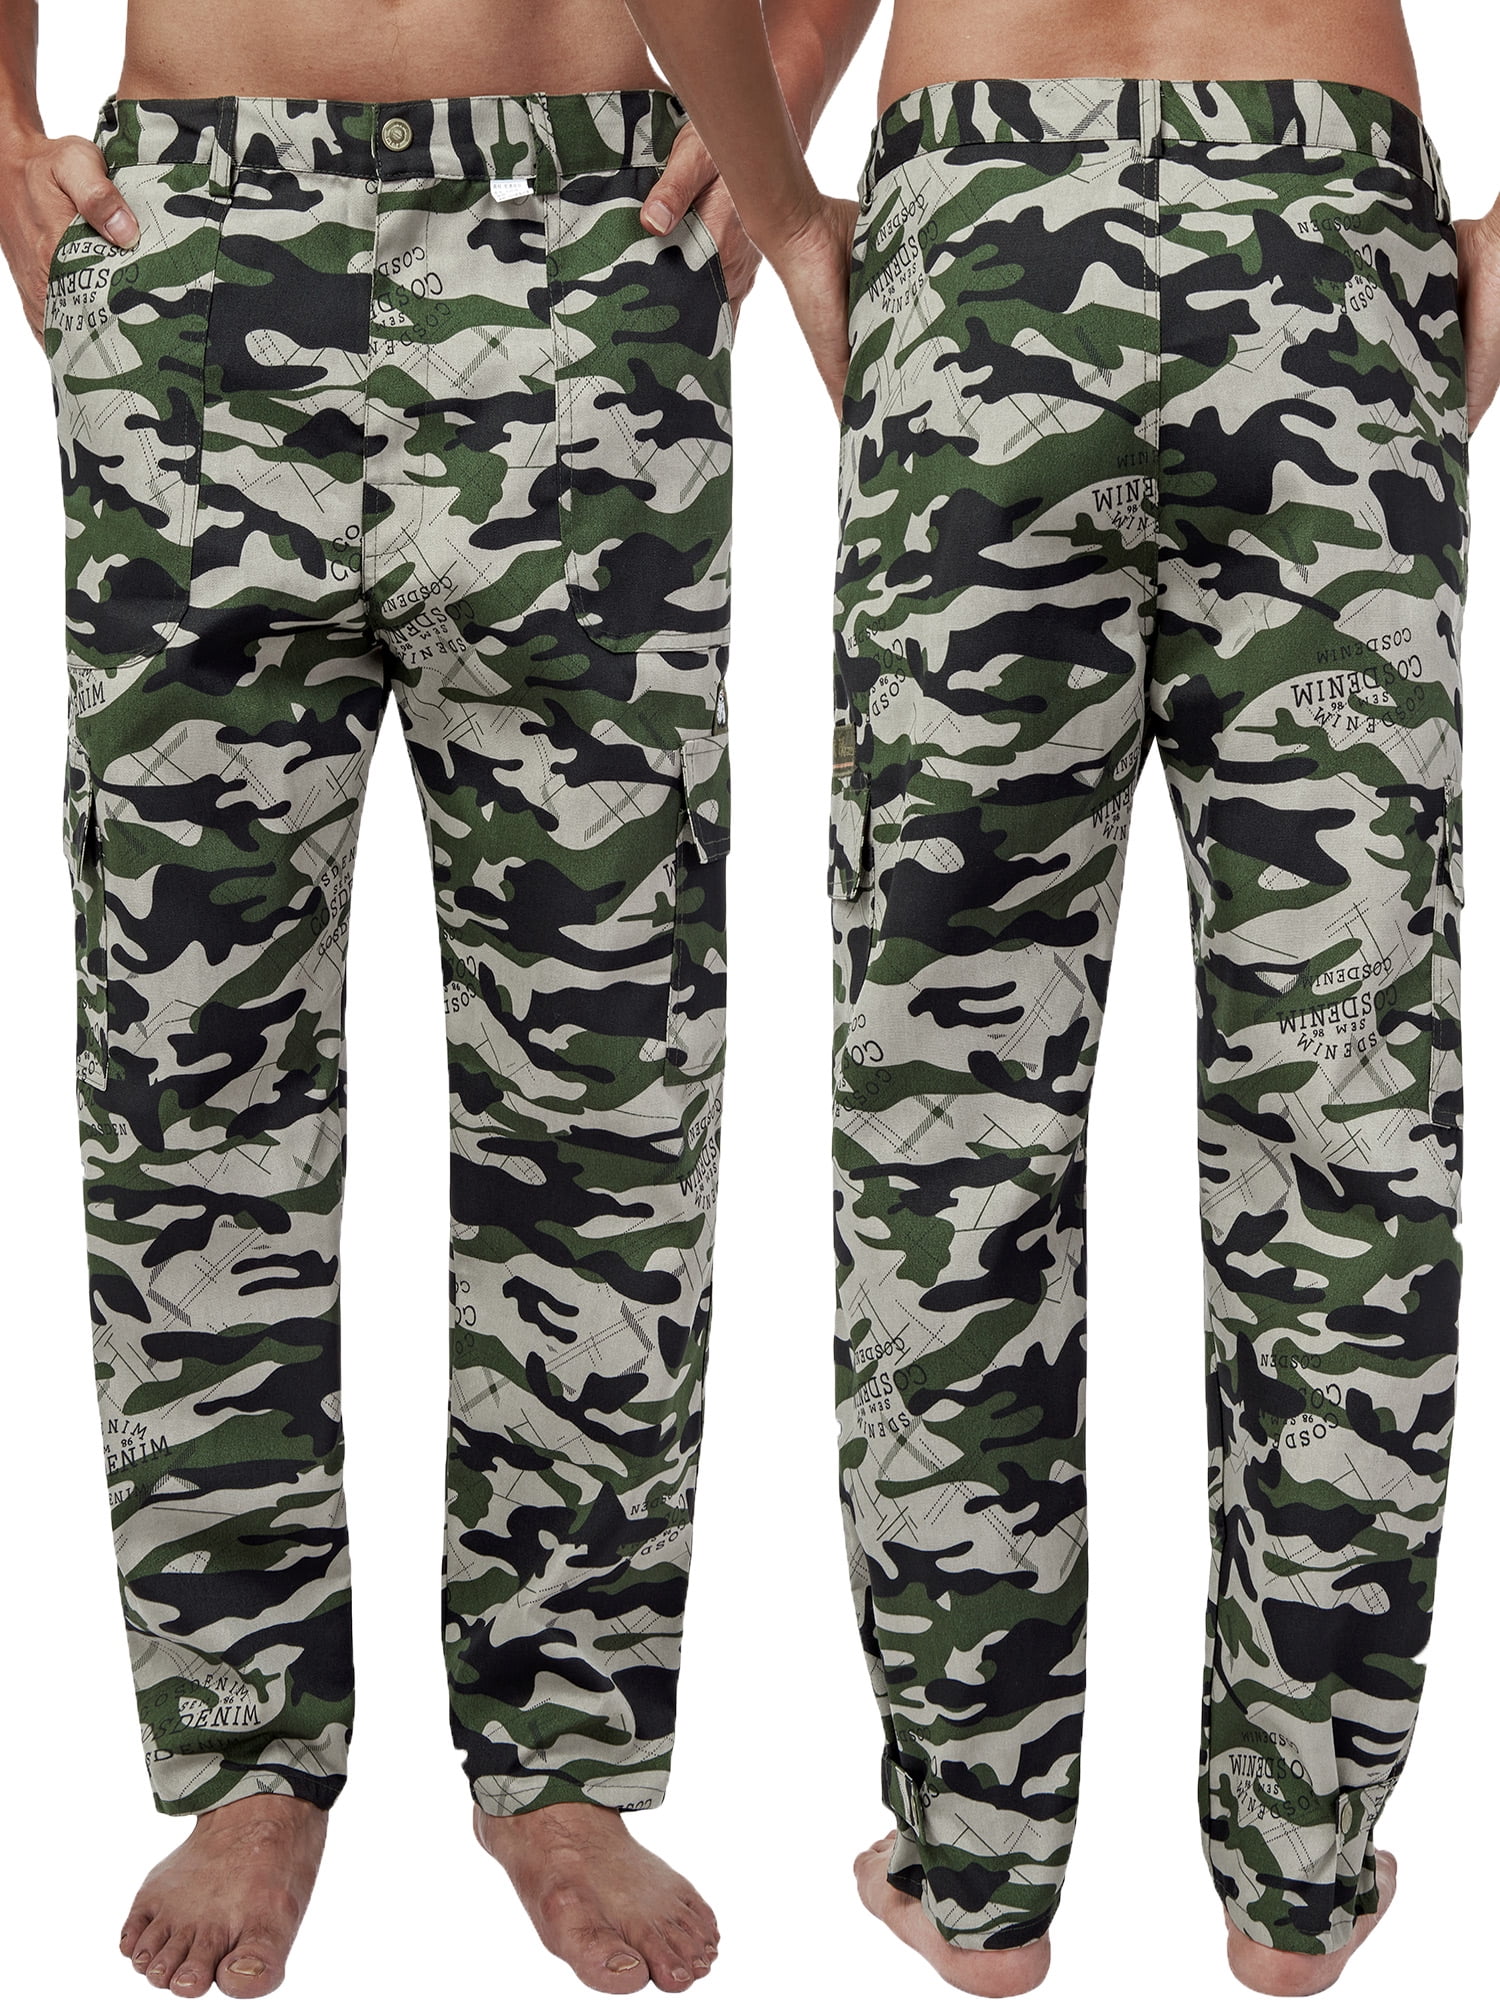 Camping Hiking Army Cargo Combat Military Men's Trousers Camouflage Pants Casual 